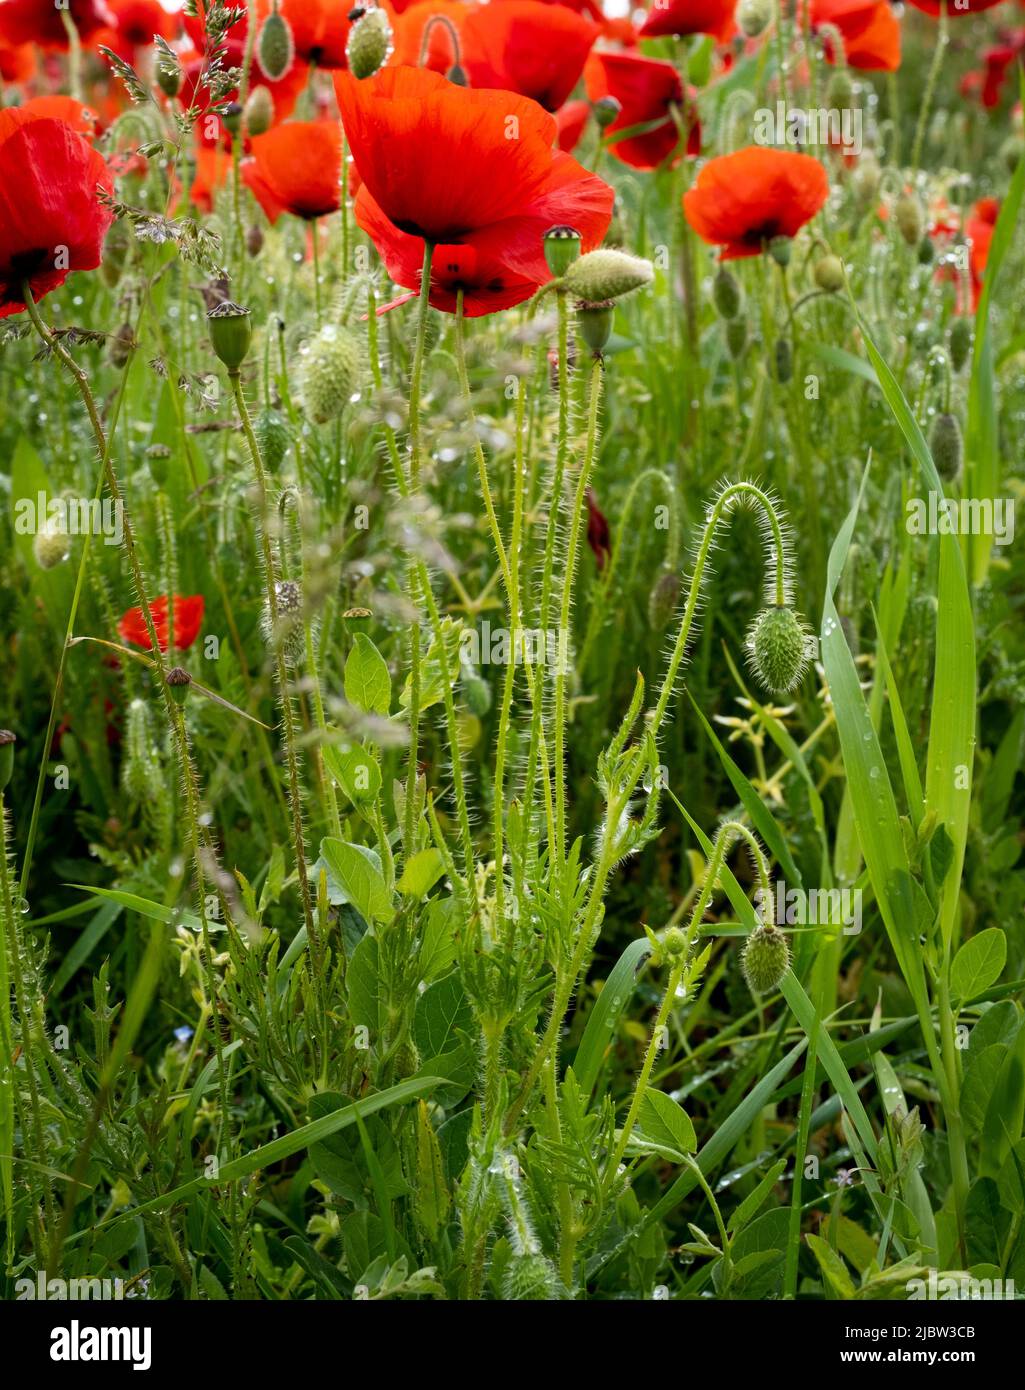 Vast poppy fields in full bright red glory at West Pentire, above Polly Joke and Crantock, Cornwall. Reminders of British Legion Poppy Day appeal. Stock Photo